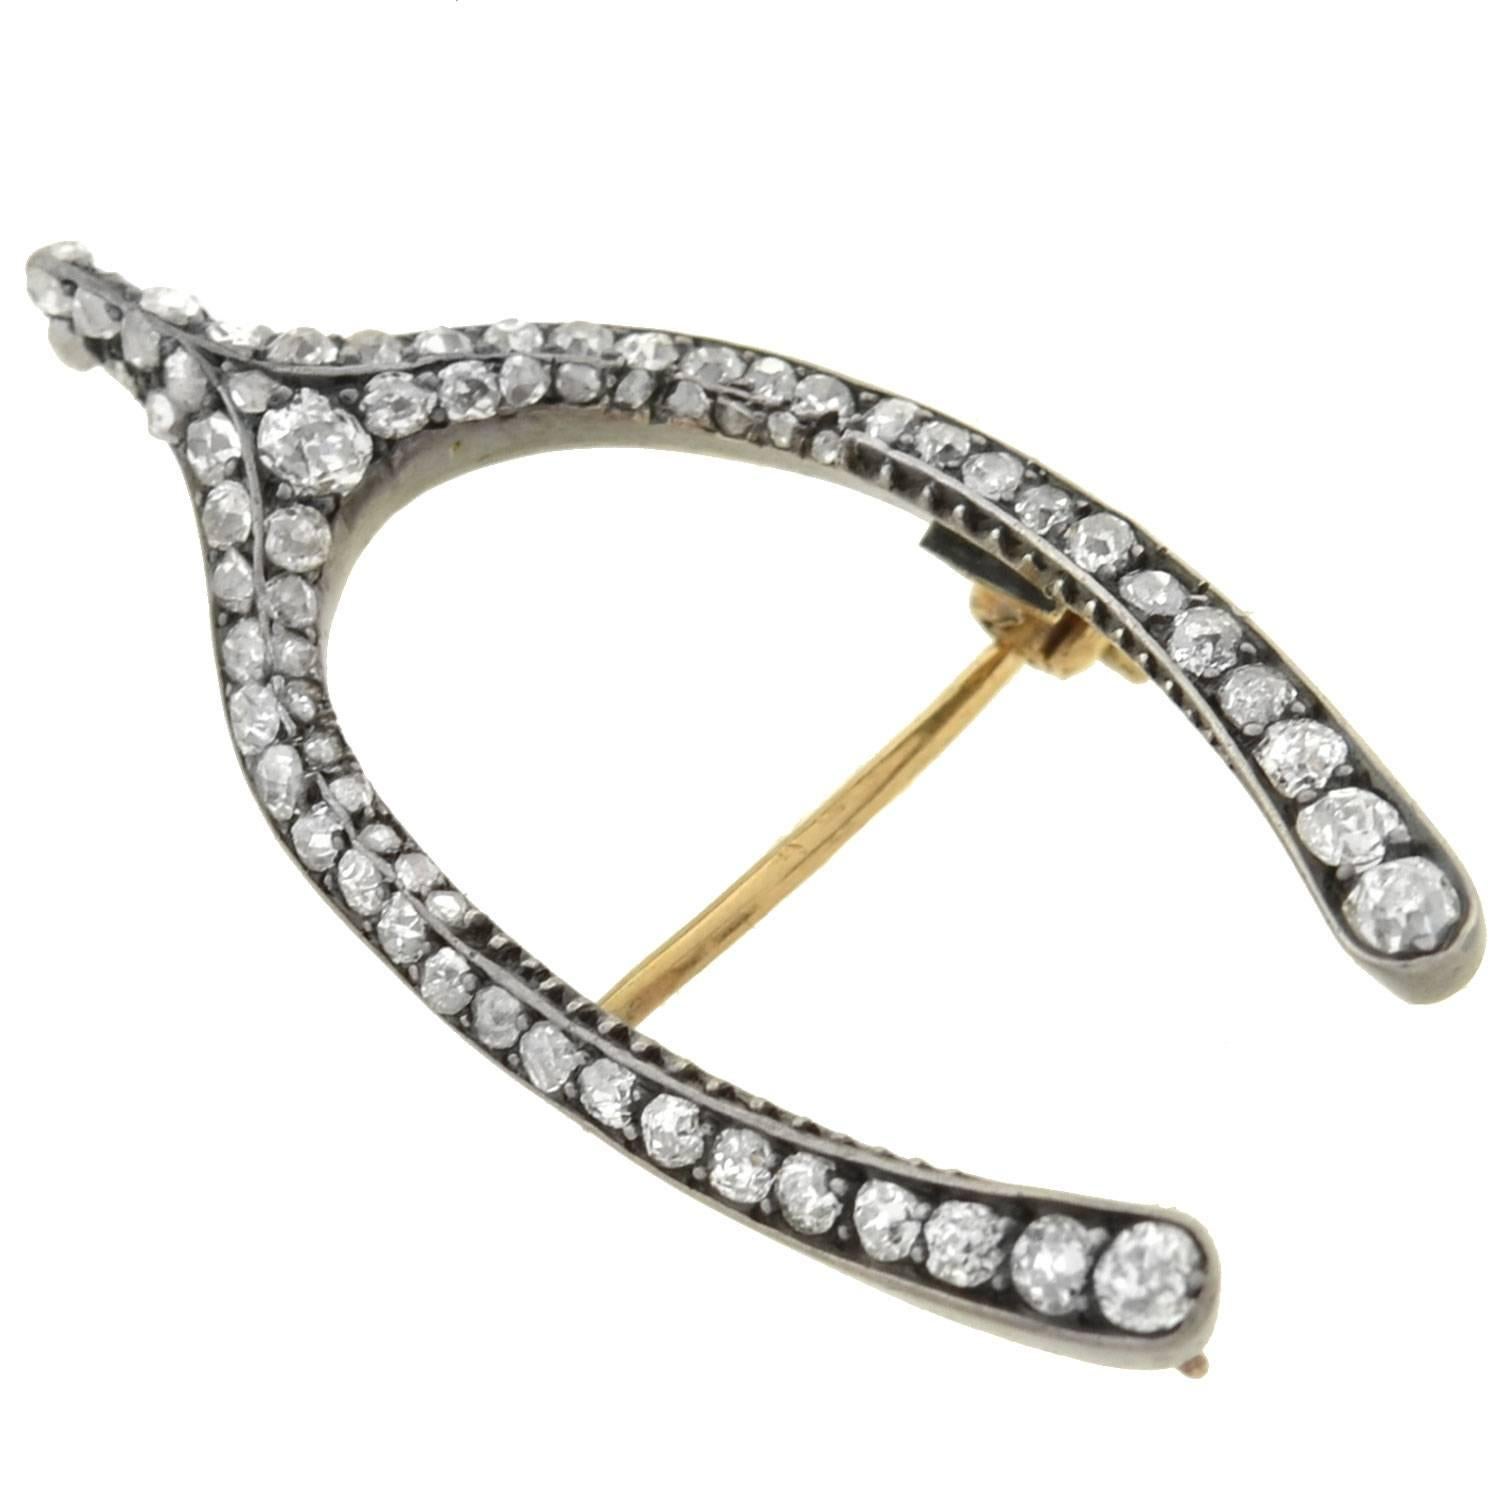 A spectacular diamond wishbone pin from the Victorian (ca1880) era! Likely French in origin, this stunning pin is crafted in silver-topped 18kt yellow gold. The piece forms a 3-dimensional wishbone shape, which is adorned with a sparkling diamond